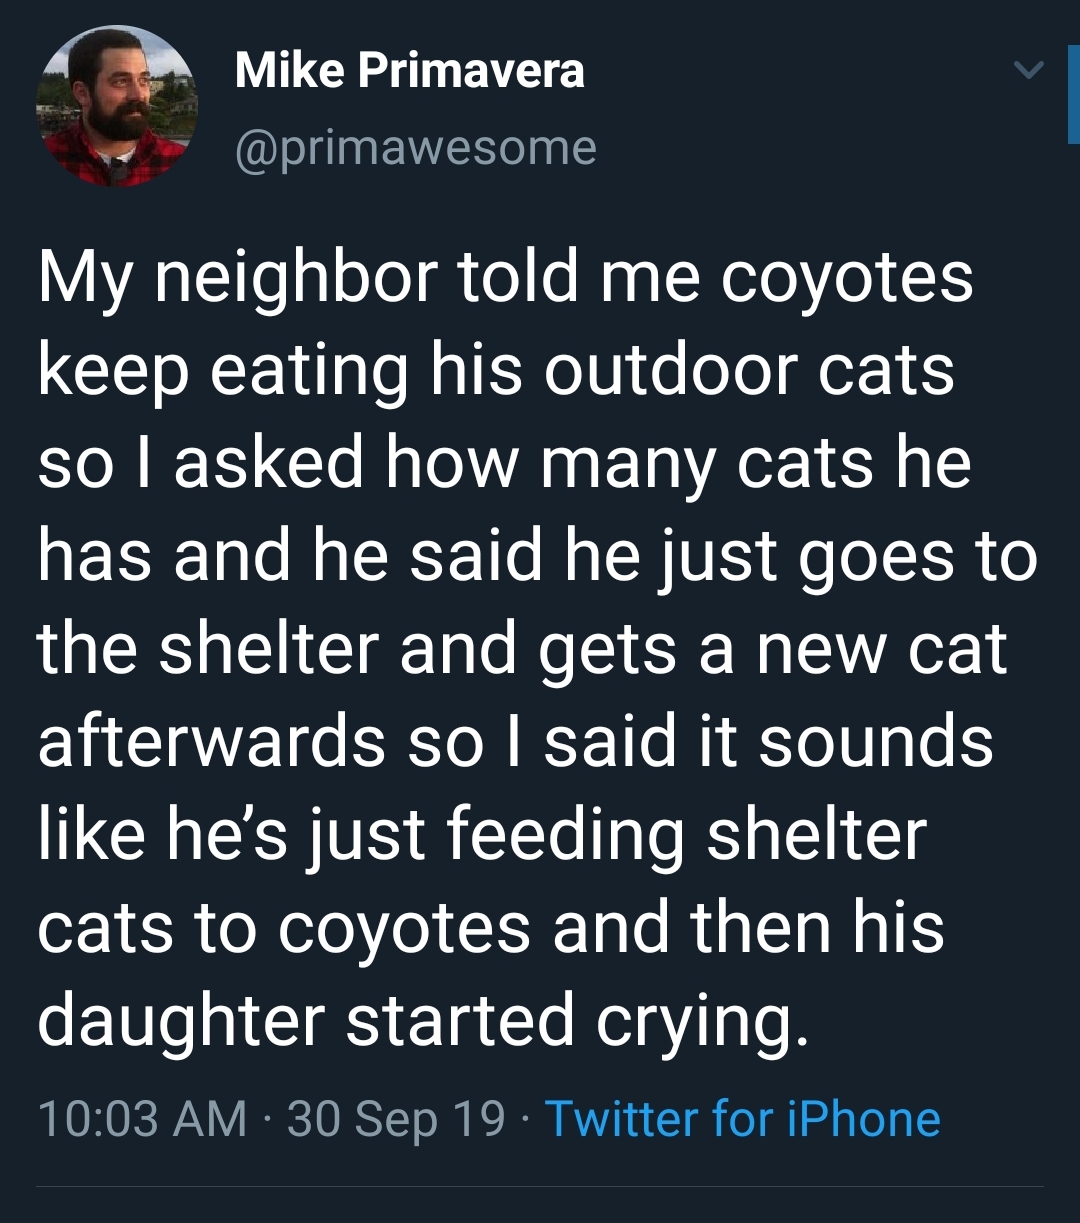 Coyotes need to eat, also...